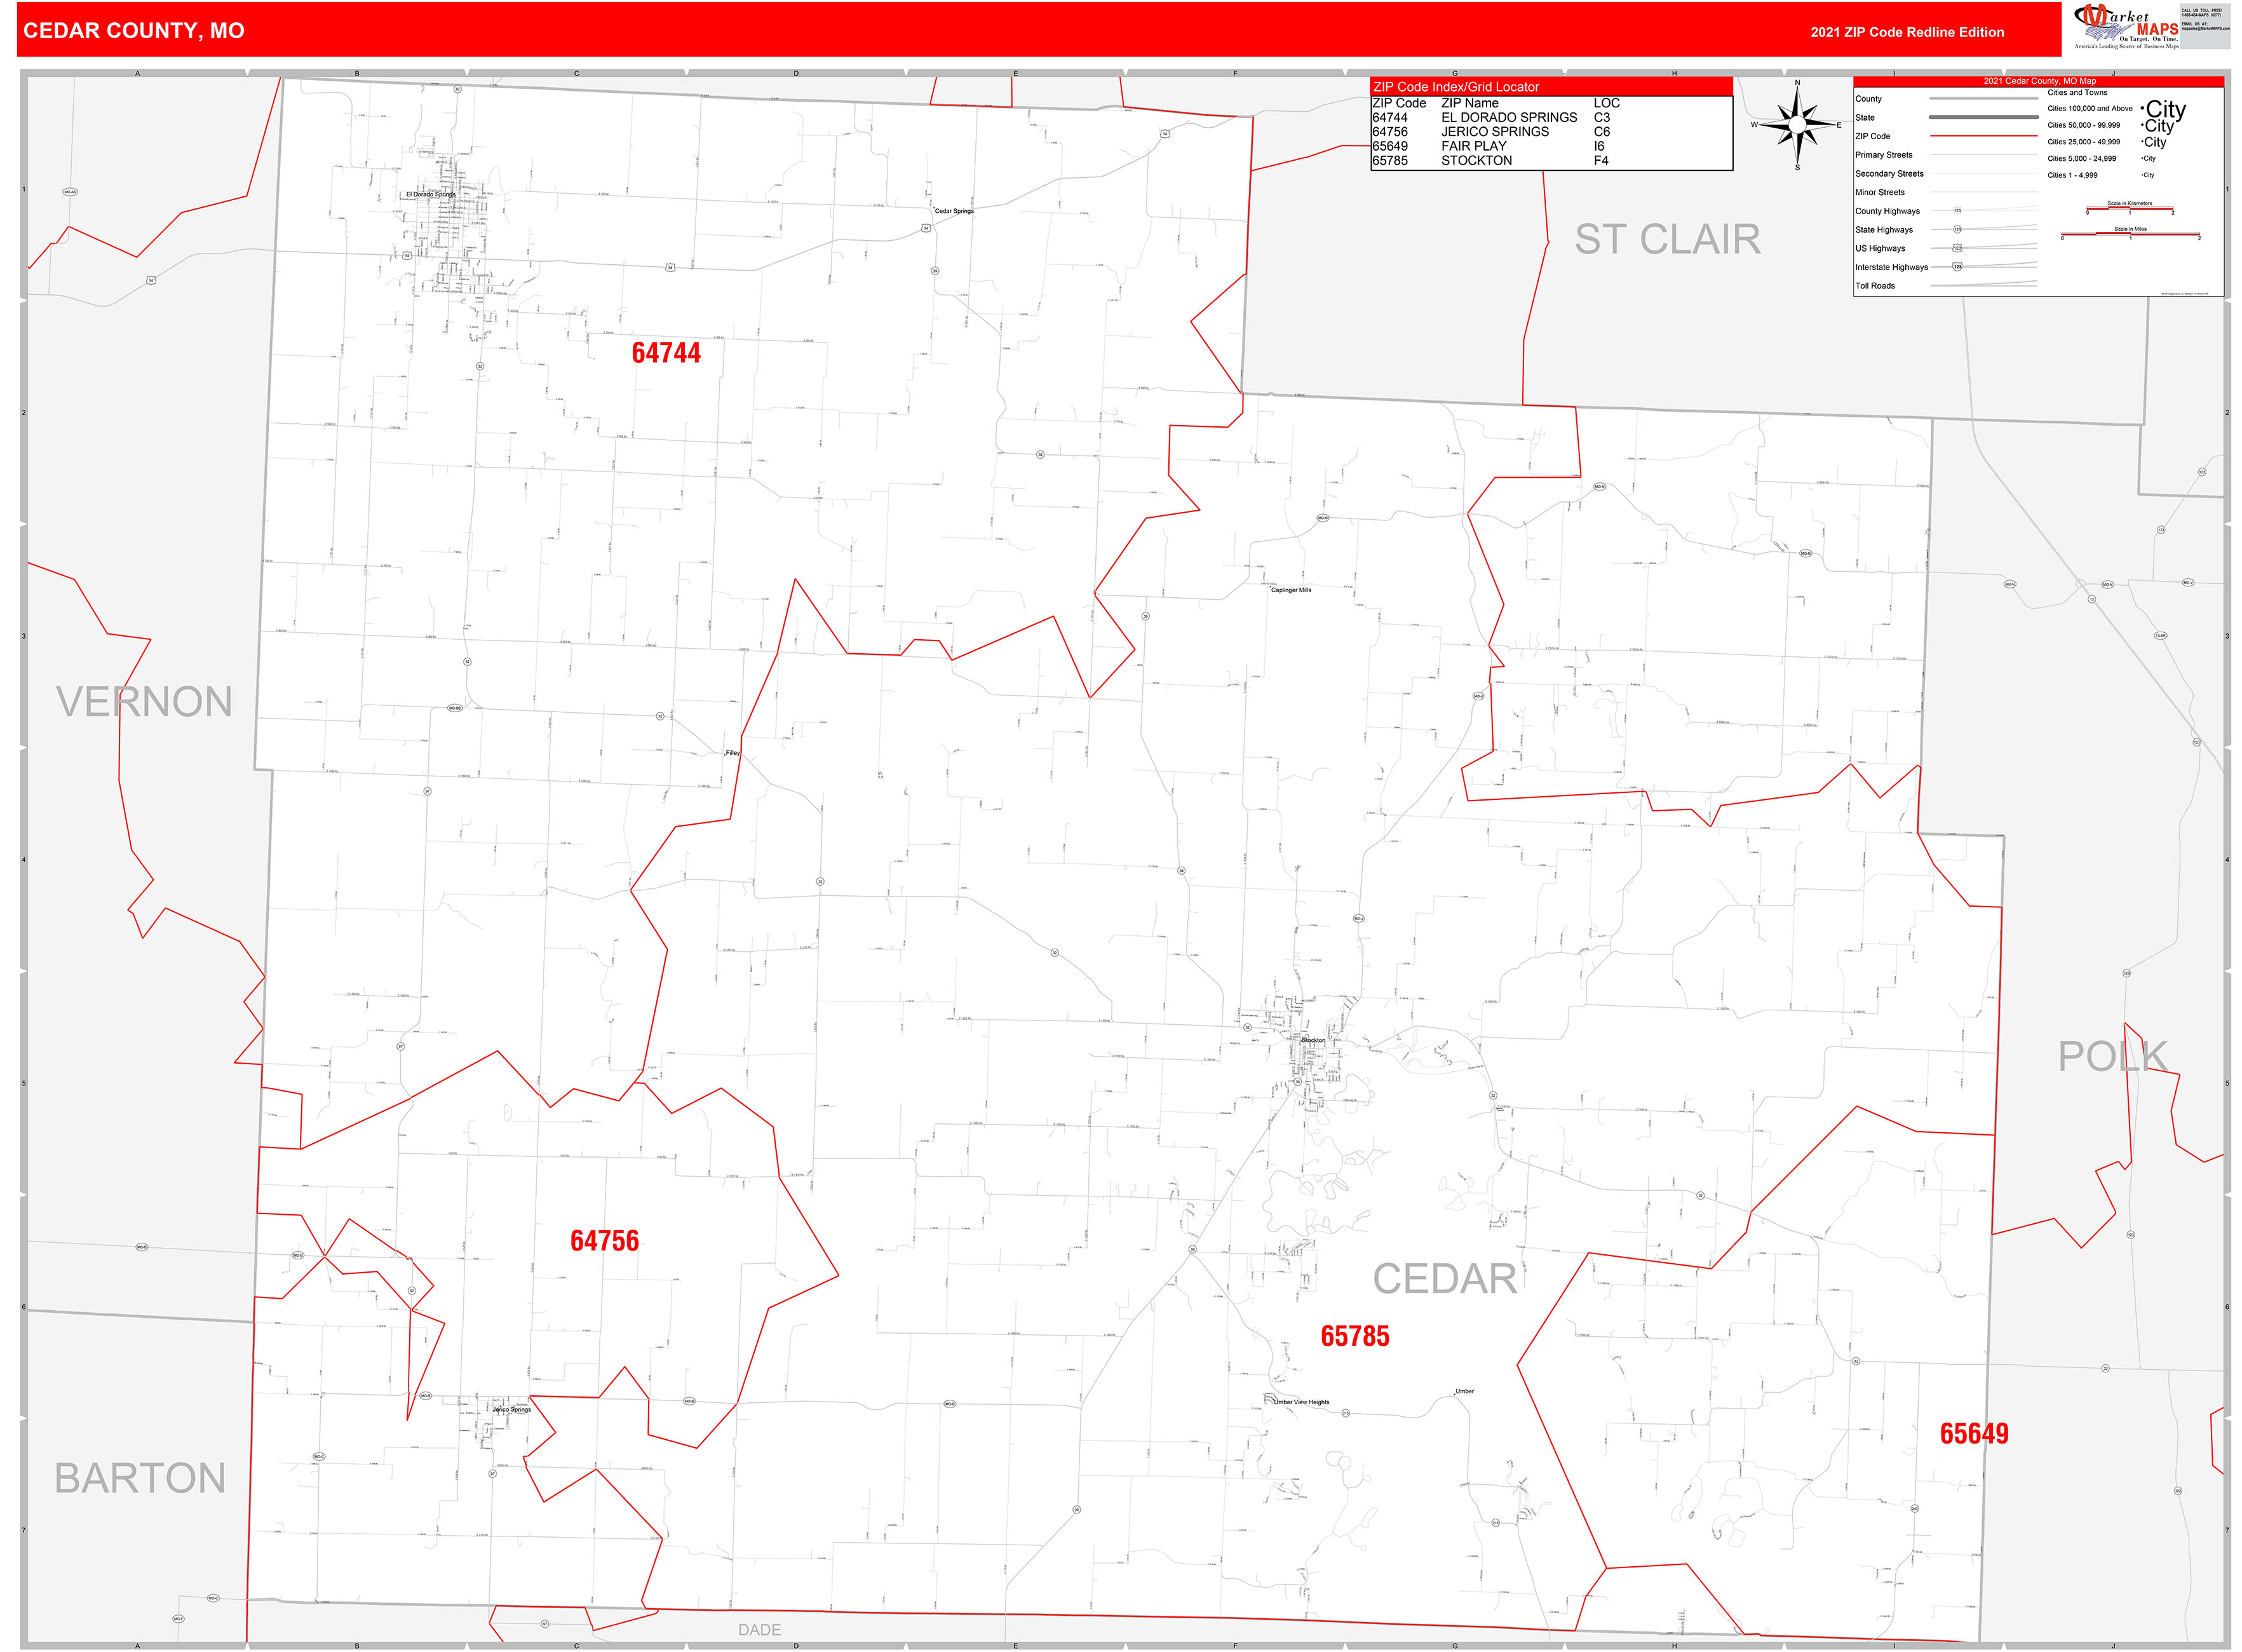 Cedar County, MO Zip Code Wall Map Red Line Style by MarketMAPS